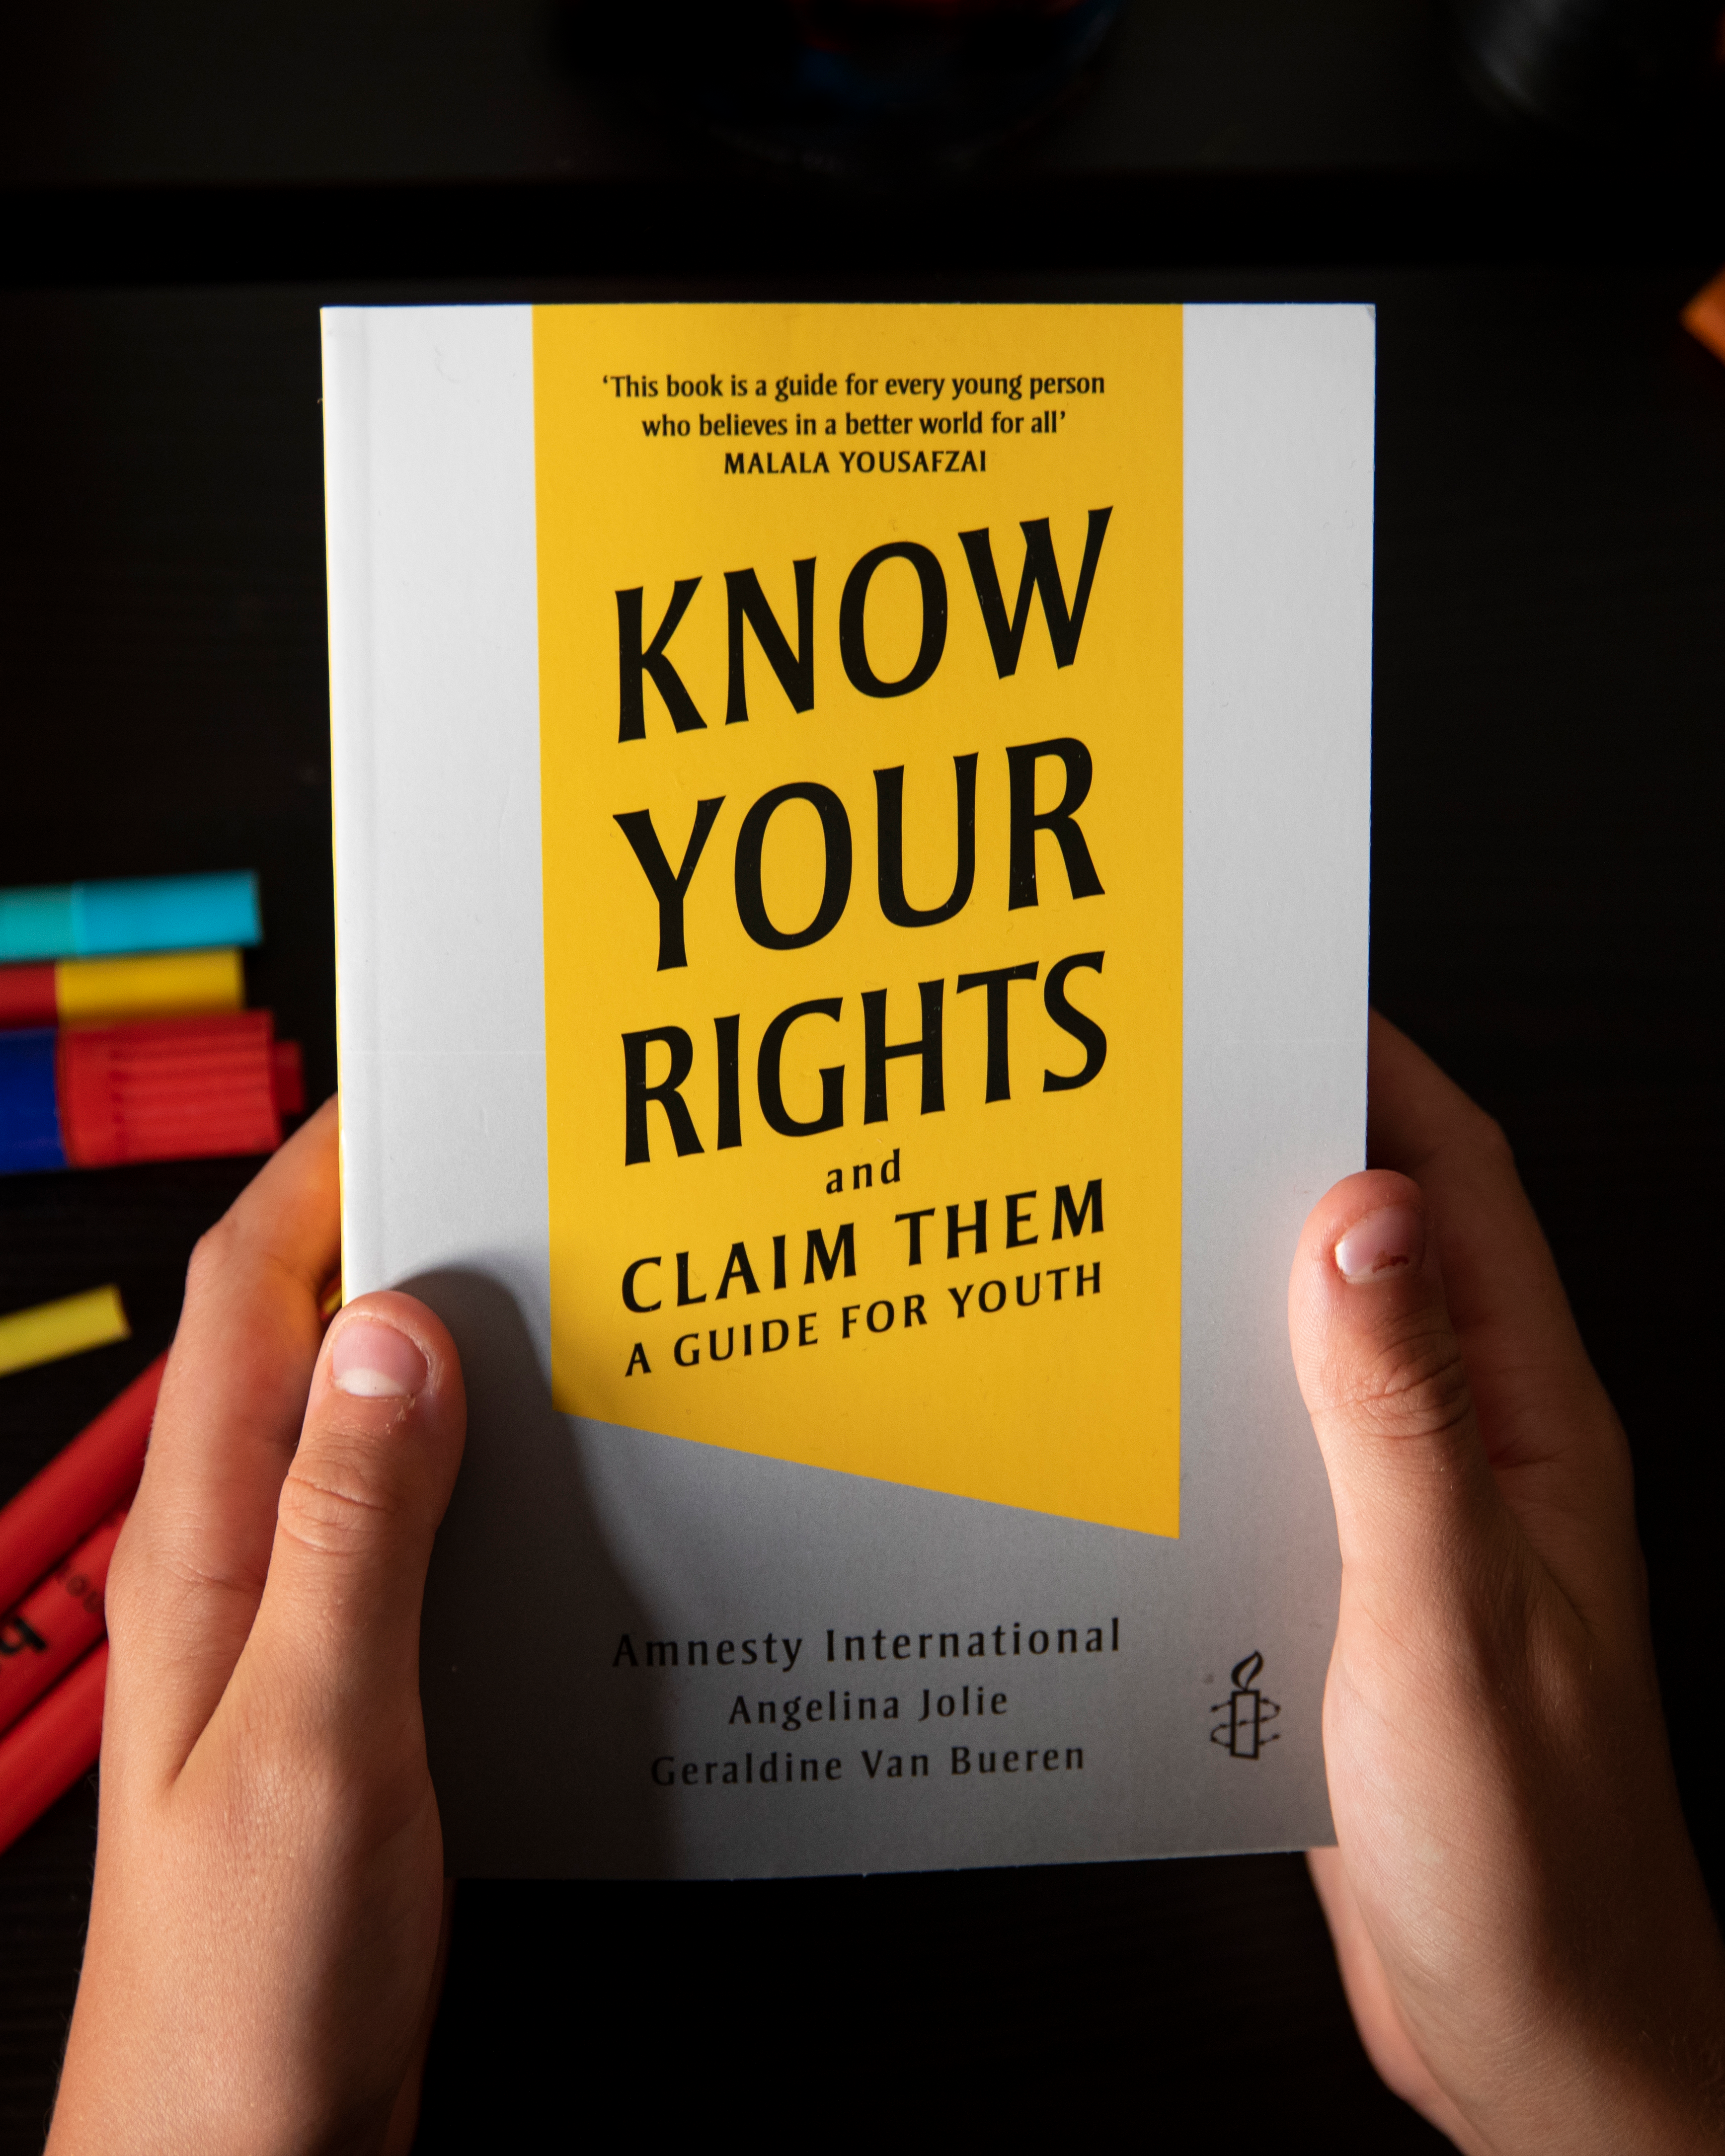 Image of someone's hands holding the "Know your Rights and Claim Them" 